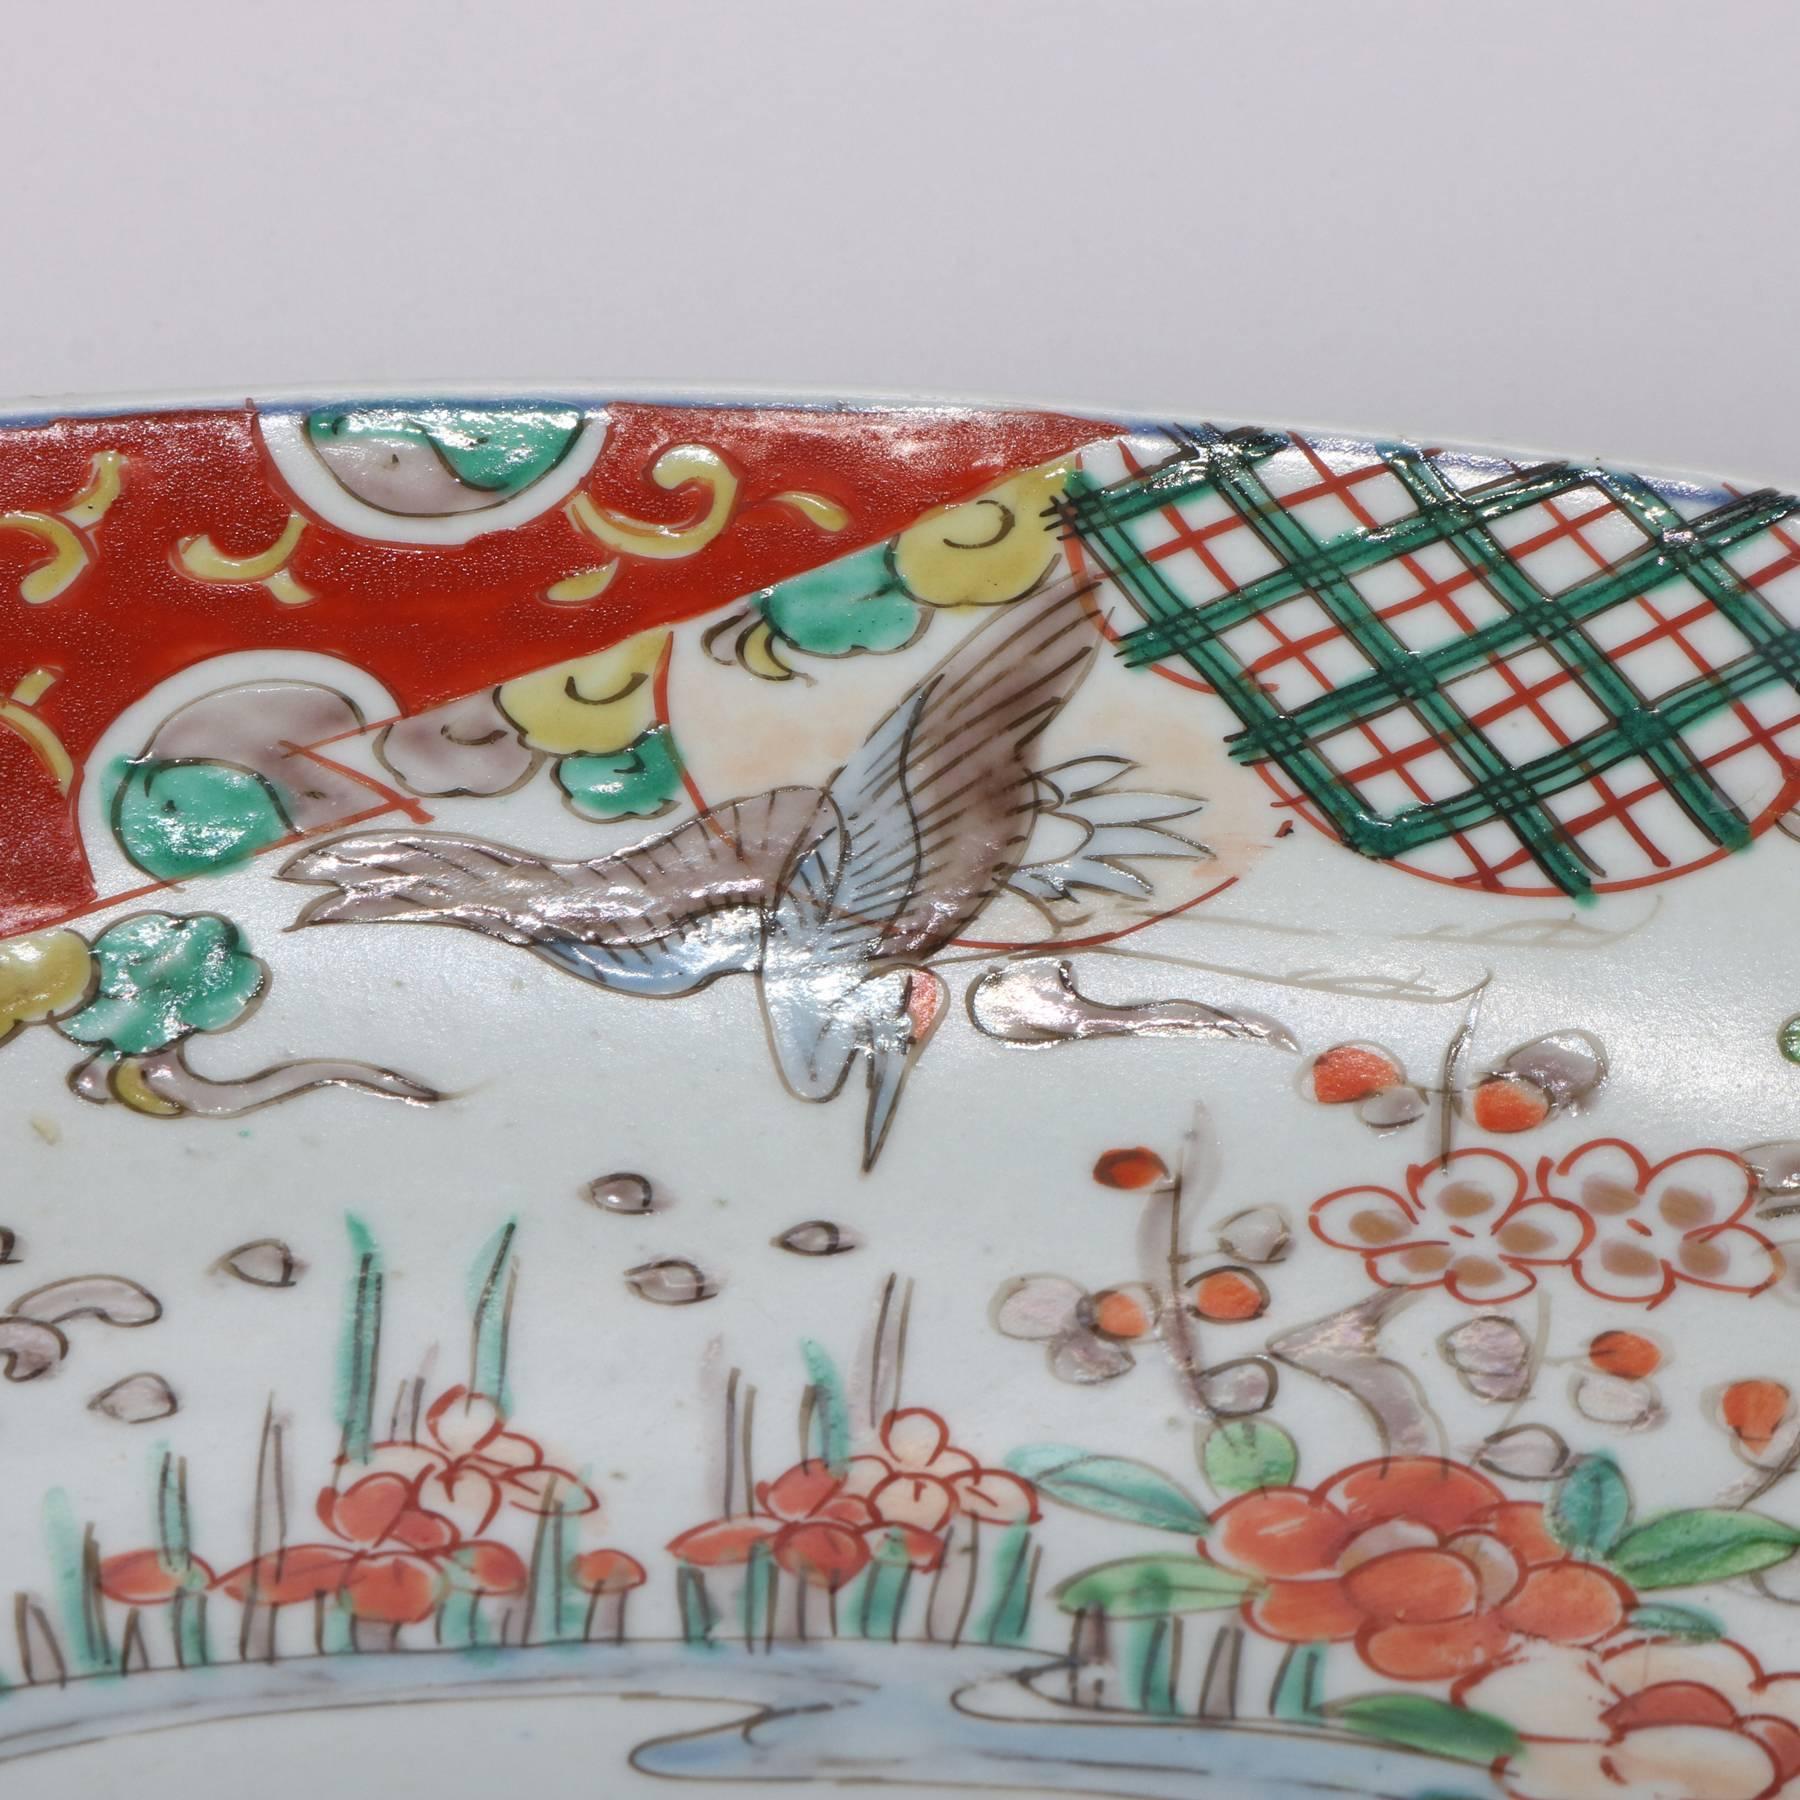 Enameled Antique Japanese Imari Porcelain Charger, Floral and Herons, 19th Century